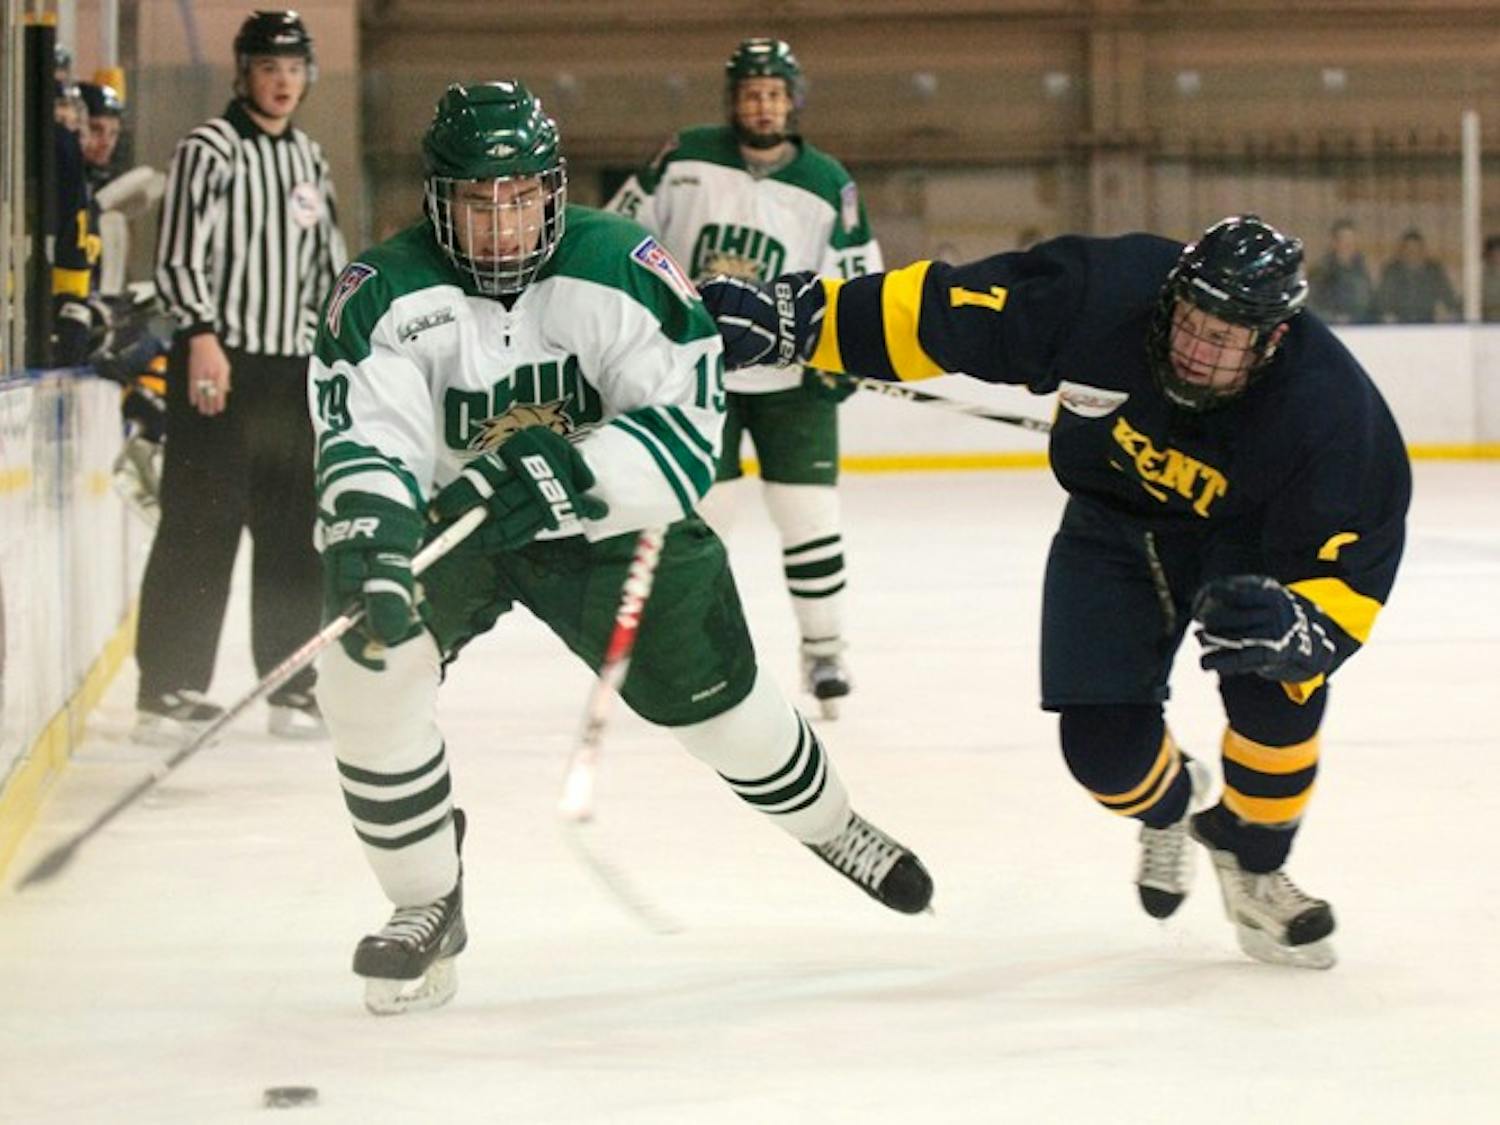 Hockey: After delayed tryouts, Ohio prepares for season opener  